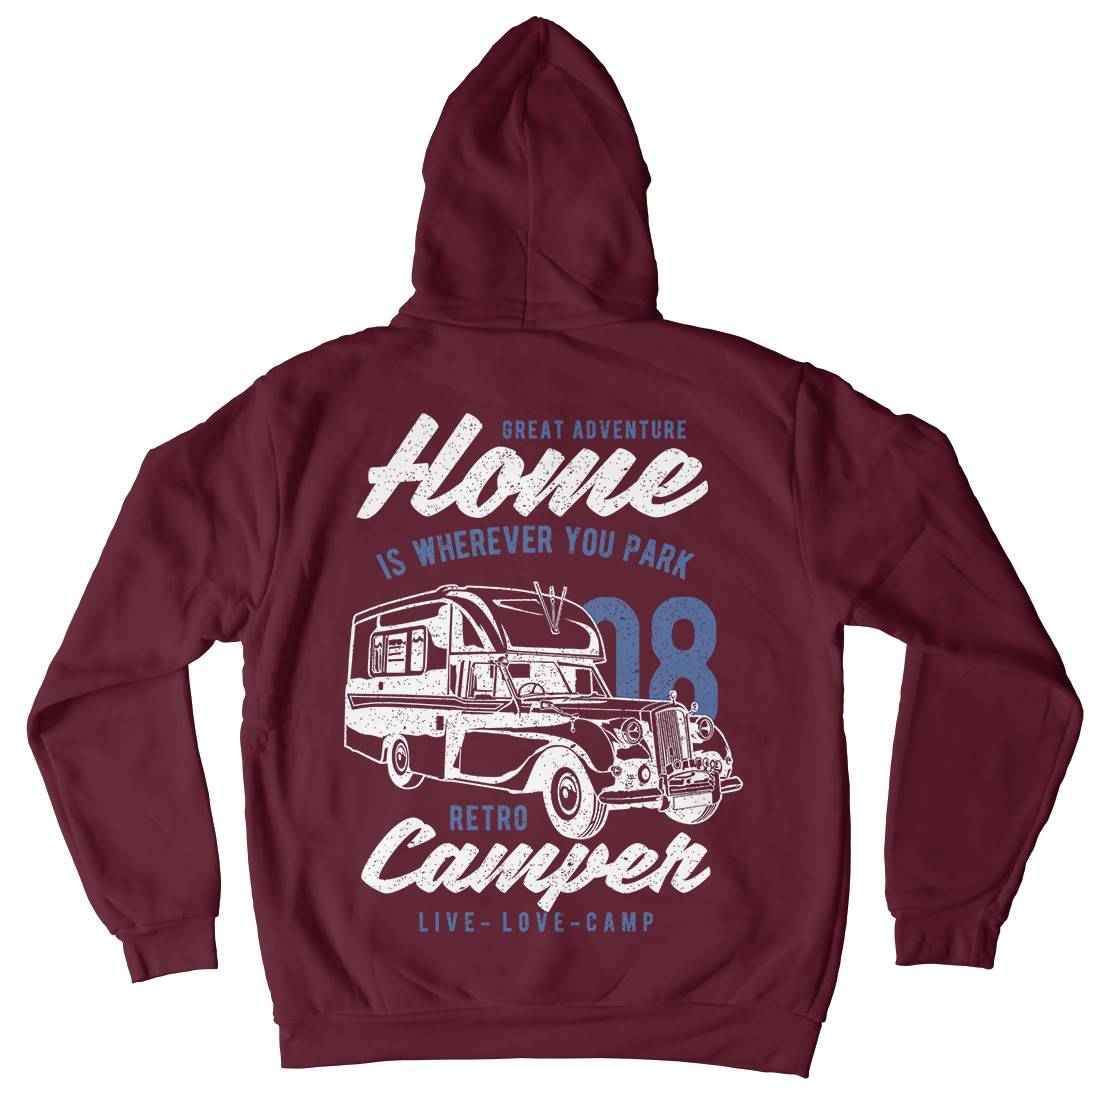 Retro Campers Kids Crew Neck Hoodie Nature A740